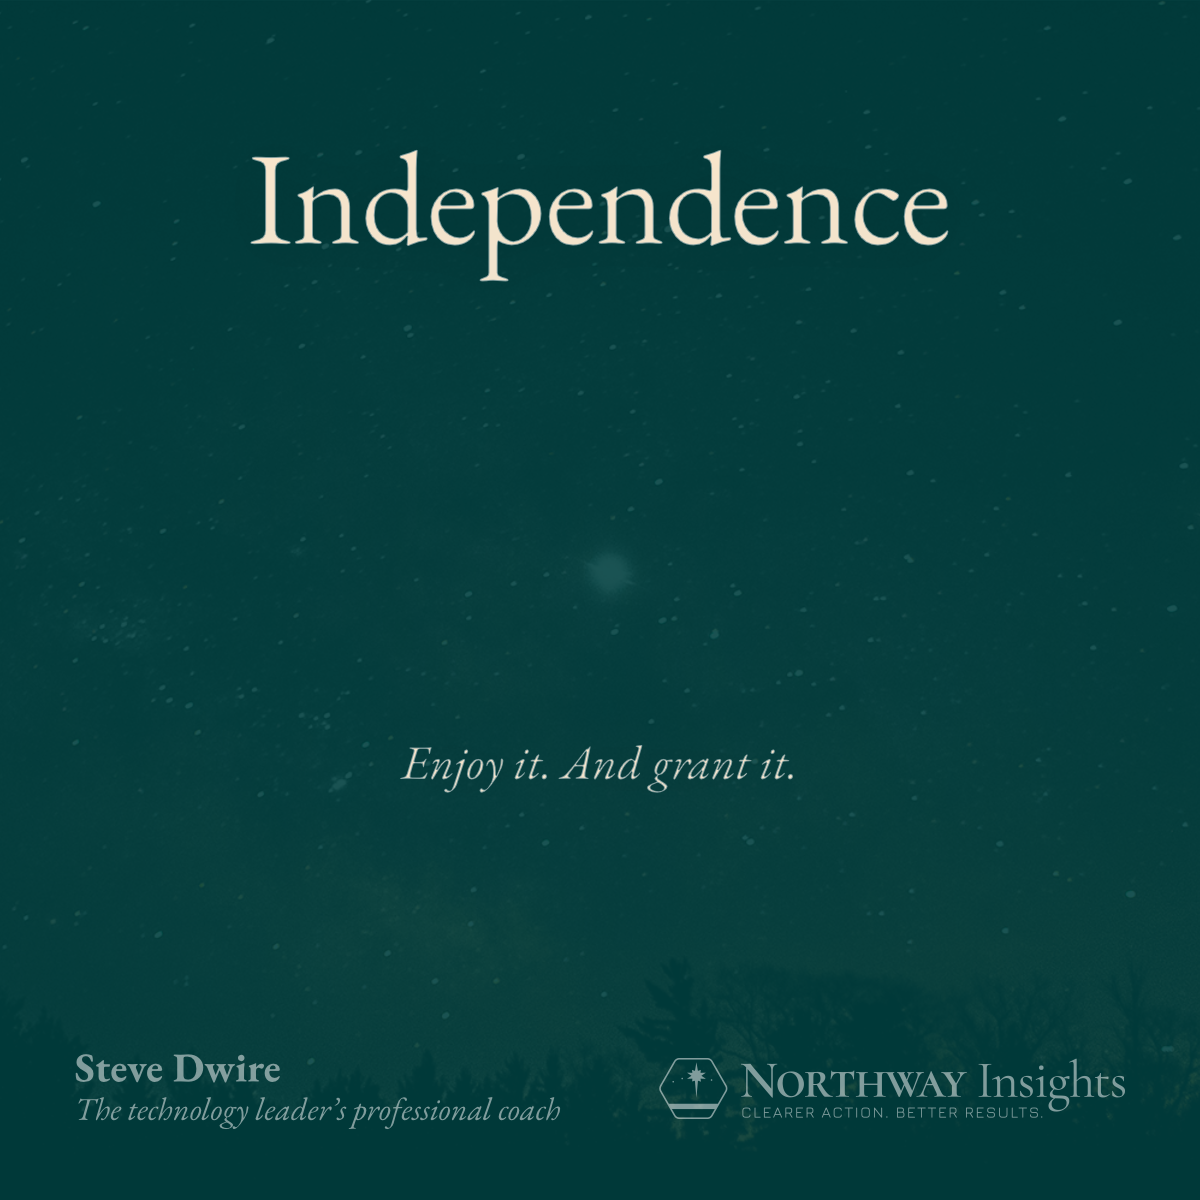 Independence (Enjoy it. And grant it.)